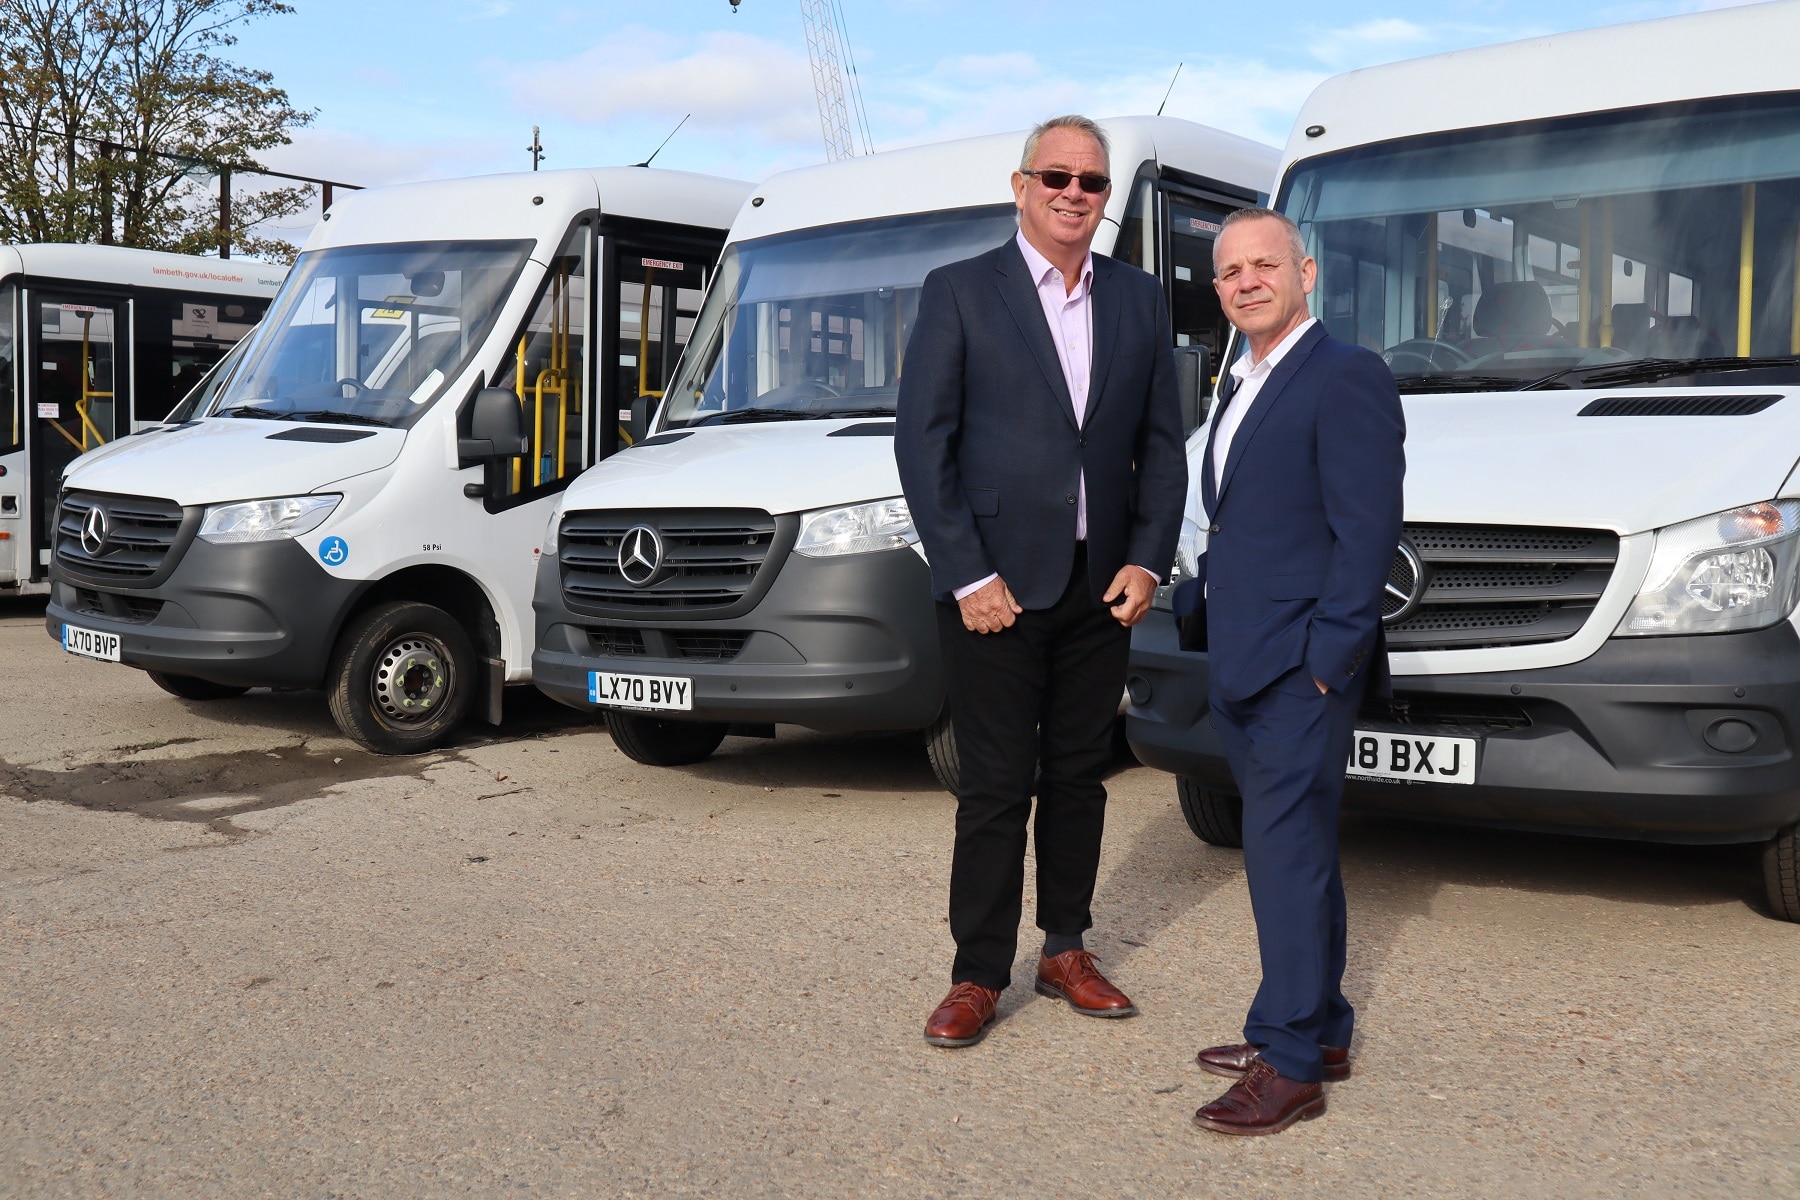 London Hire Managing Director Nigel Farr and Sales and Operations Director Peter Moxom